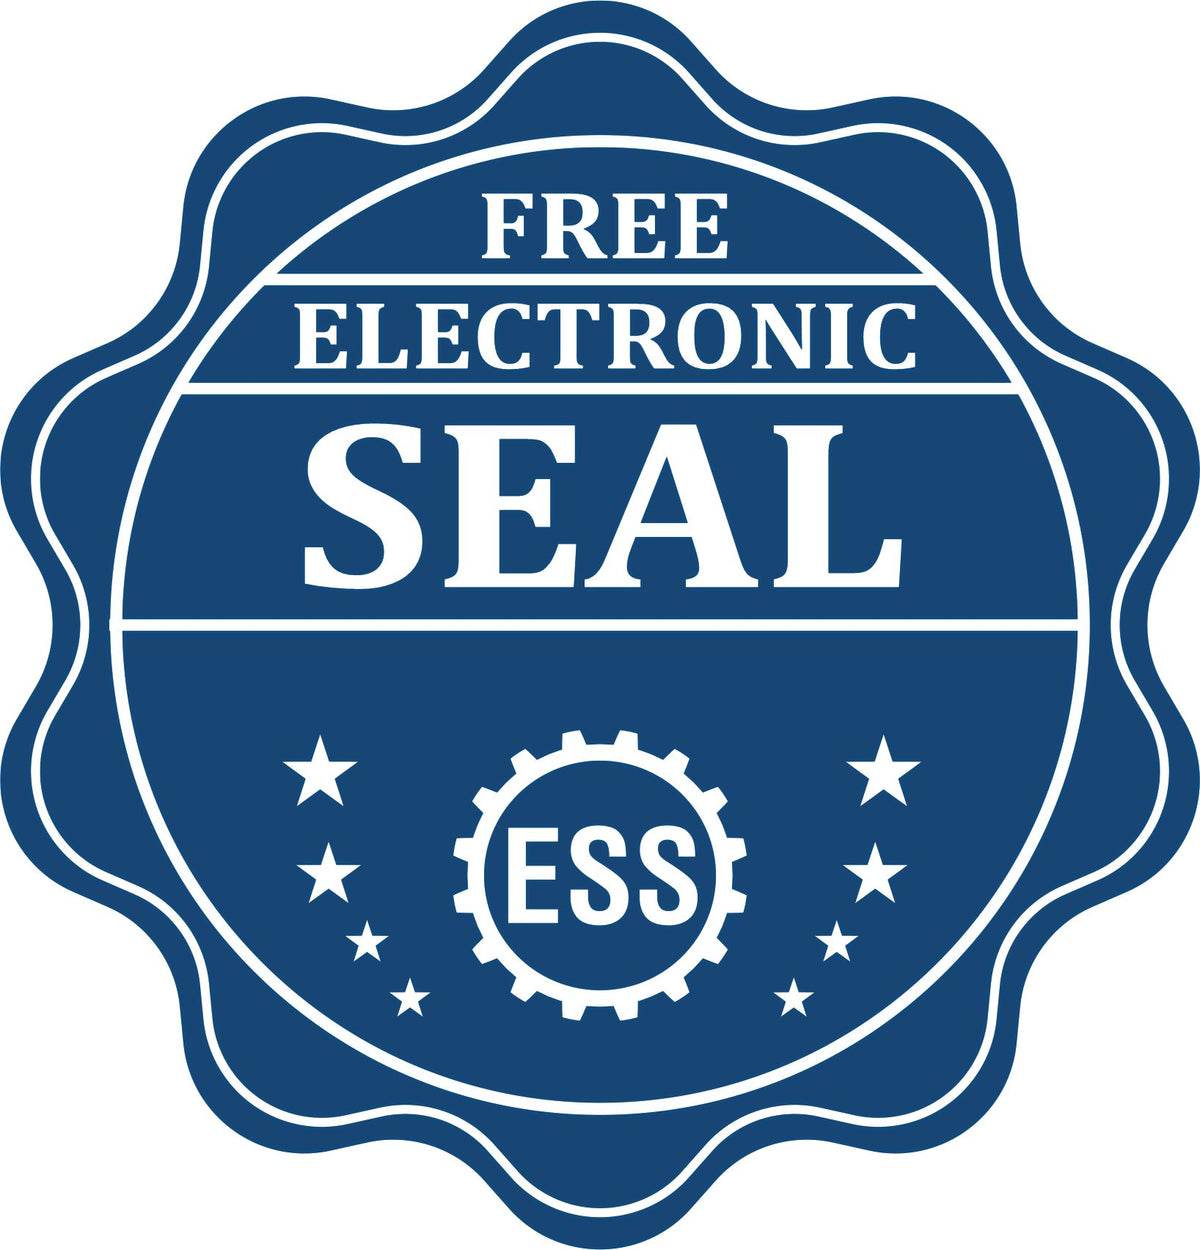 A badge showing a free electronic seal for the Heavy Duty Cast Iron Tennessee Architect Embosser with stars and the ESS gear on the emblem.